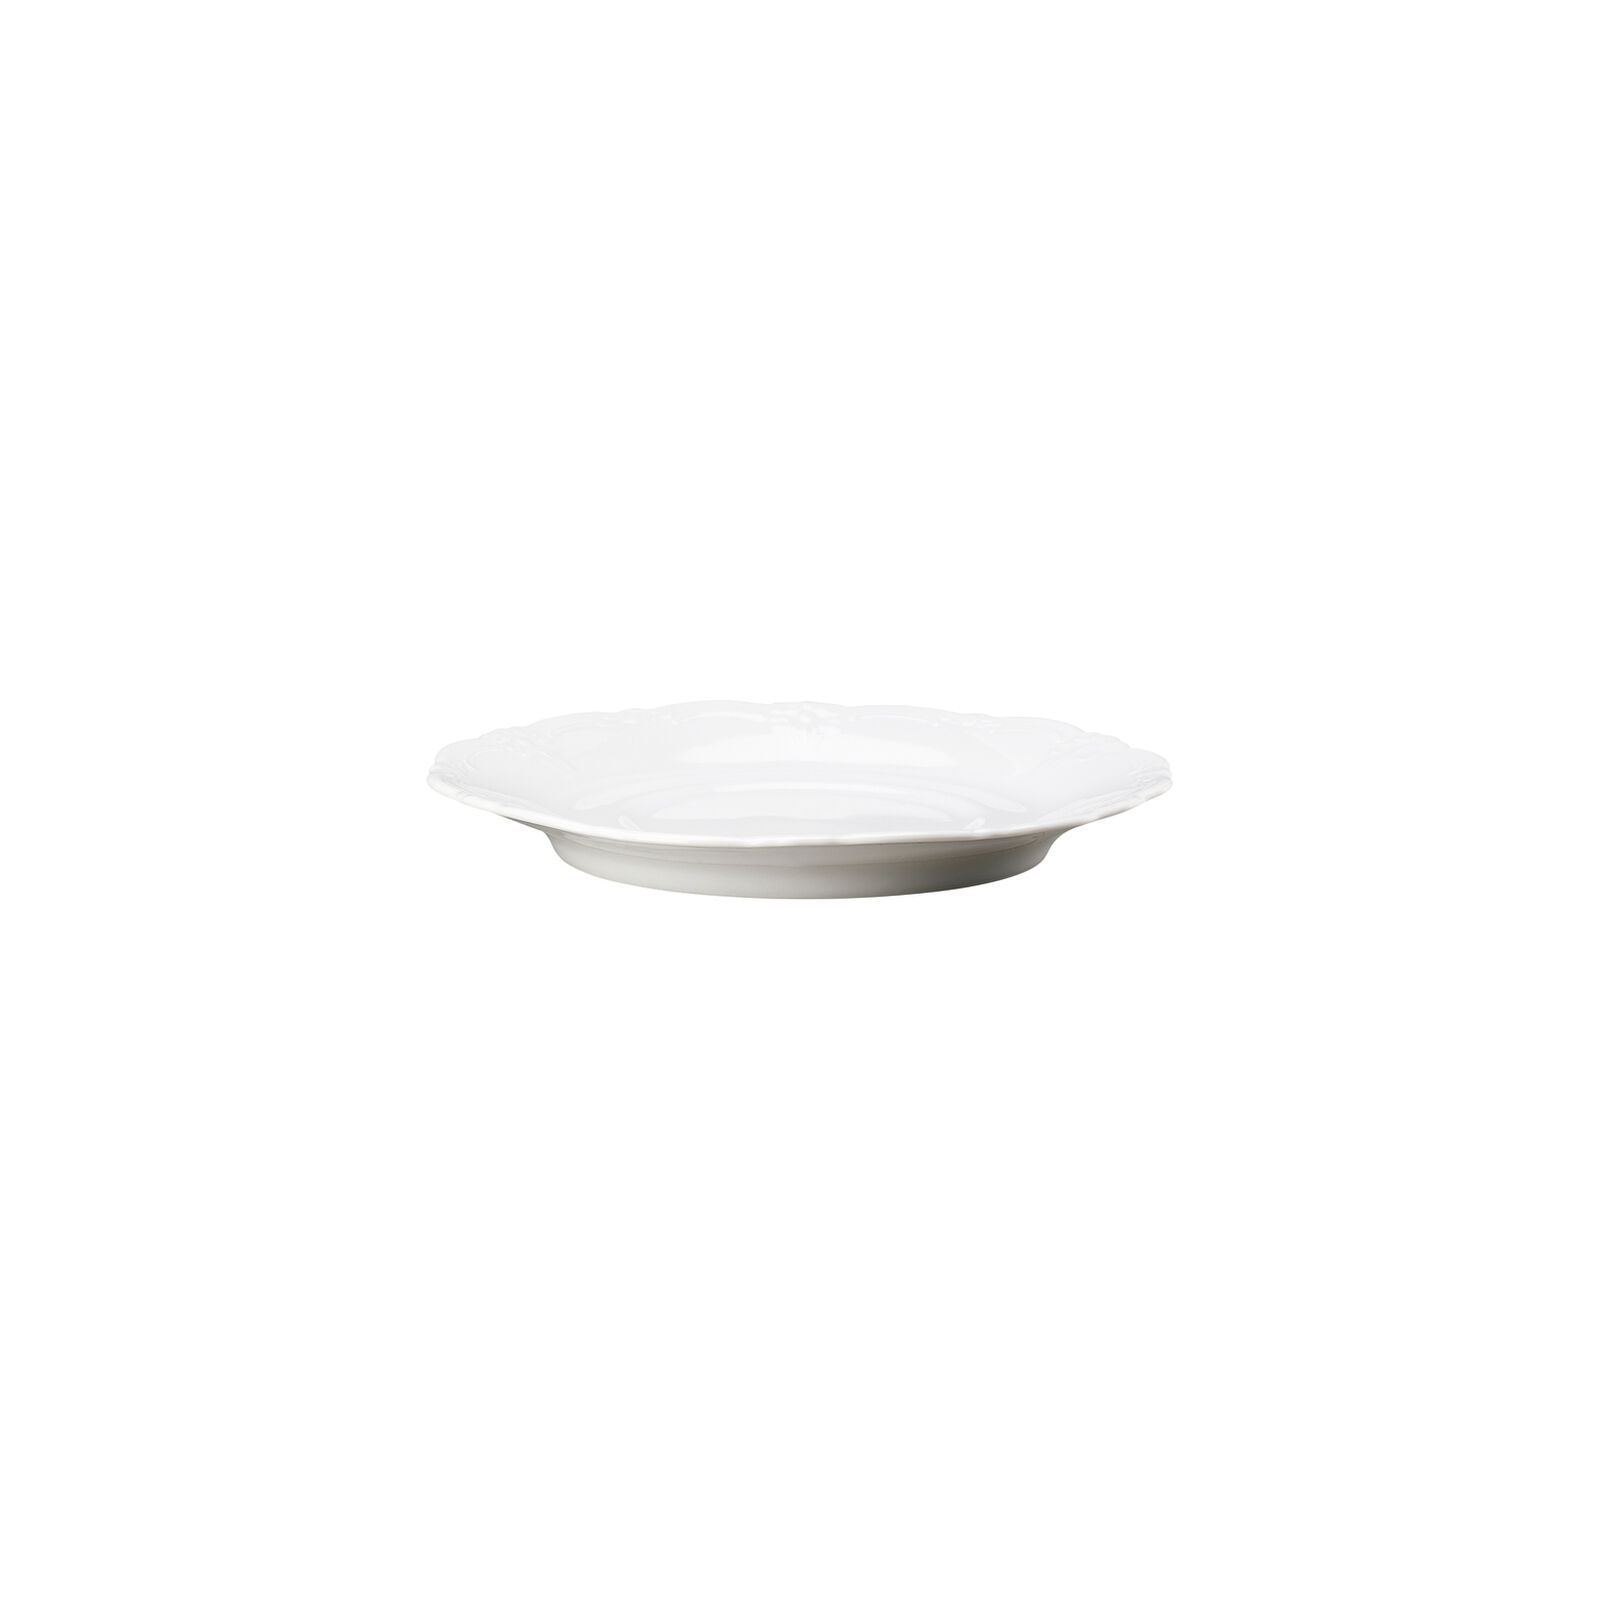 Hutschenreuther Porcelain, Creamsoup Baronesse Weiss saucer